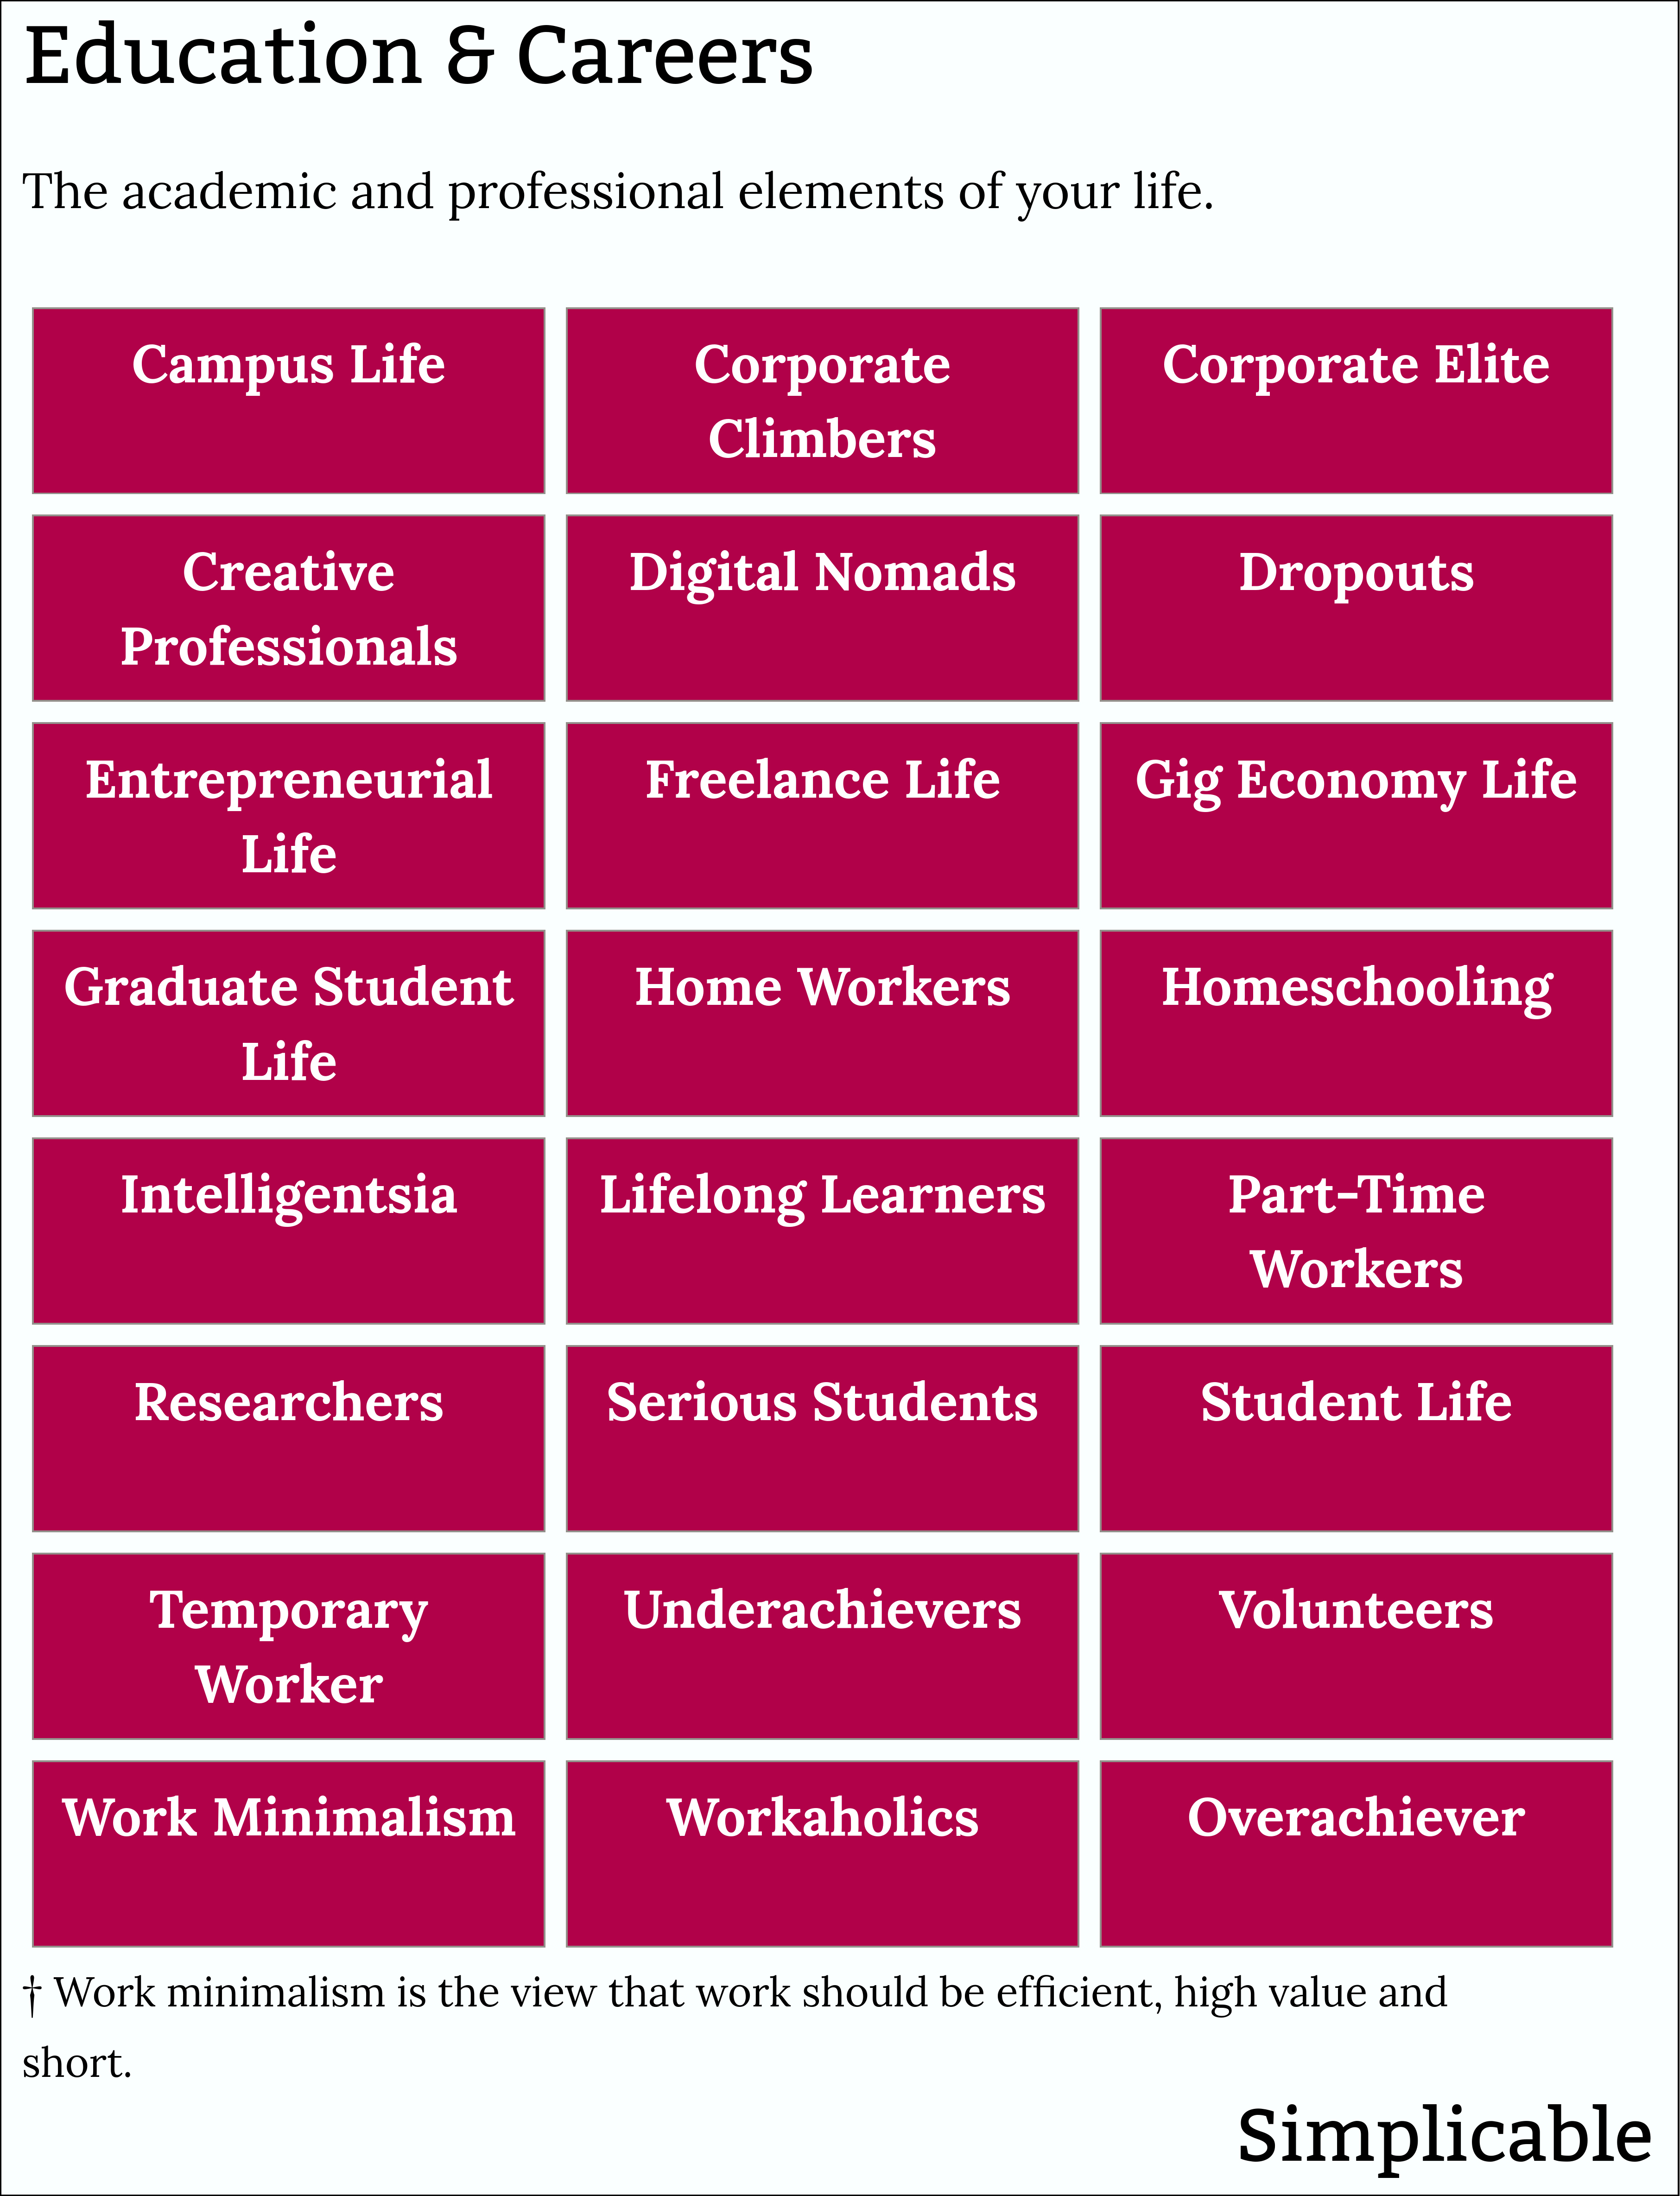 lifestyles related to education and careers